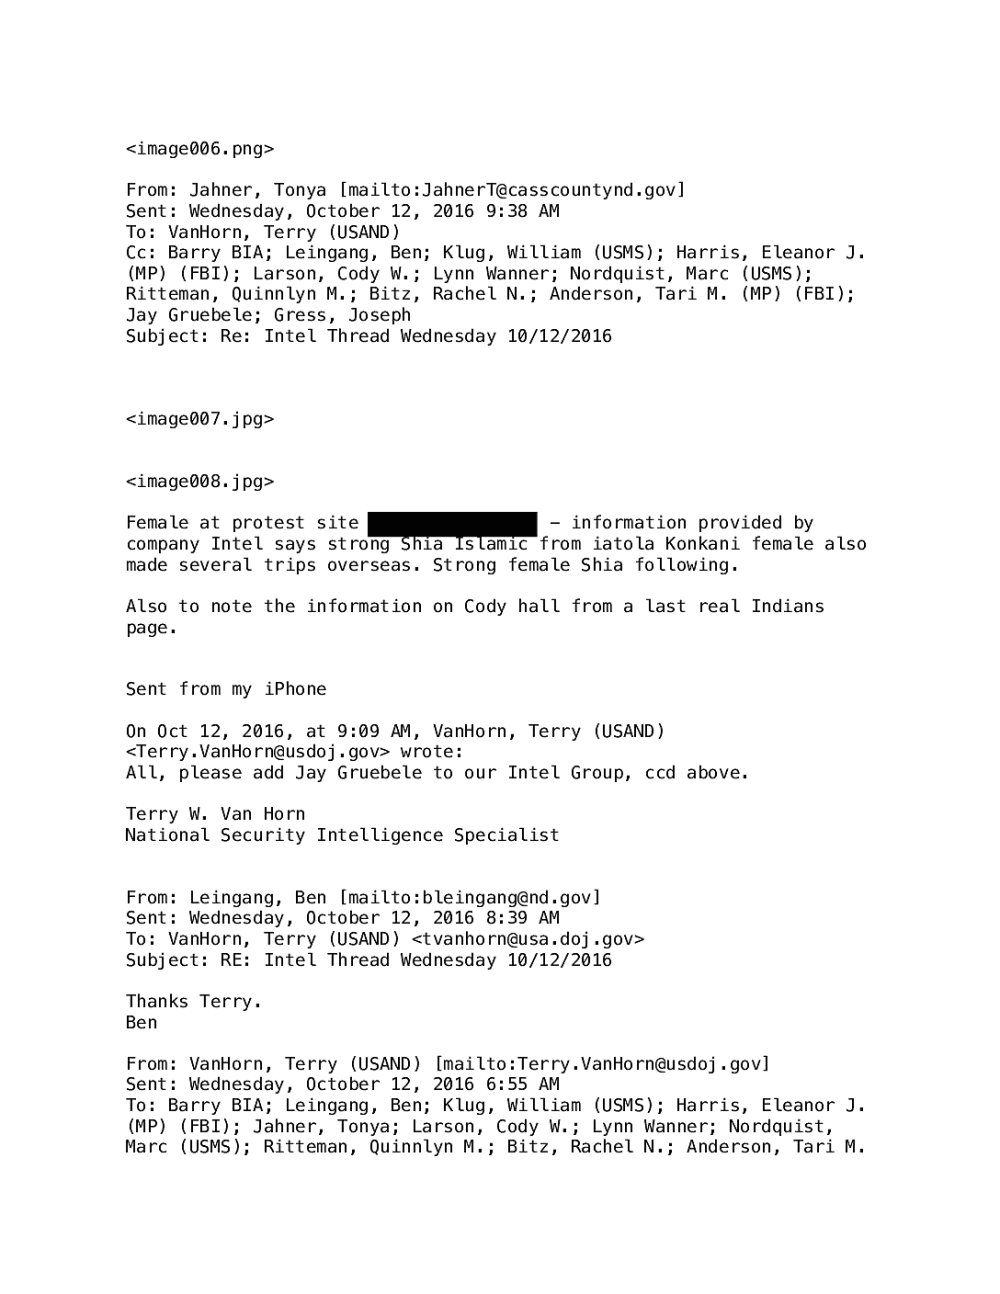 Page 11 from Intel Group Email Thread